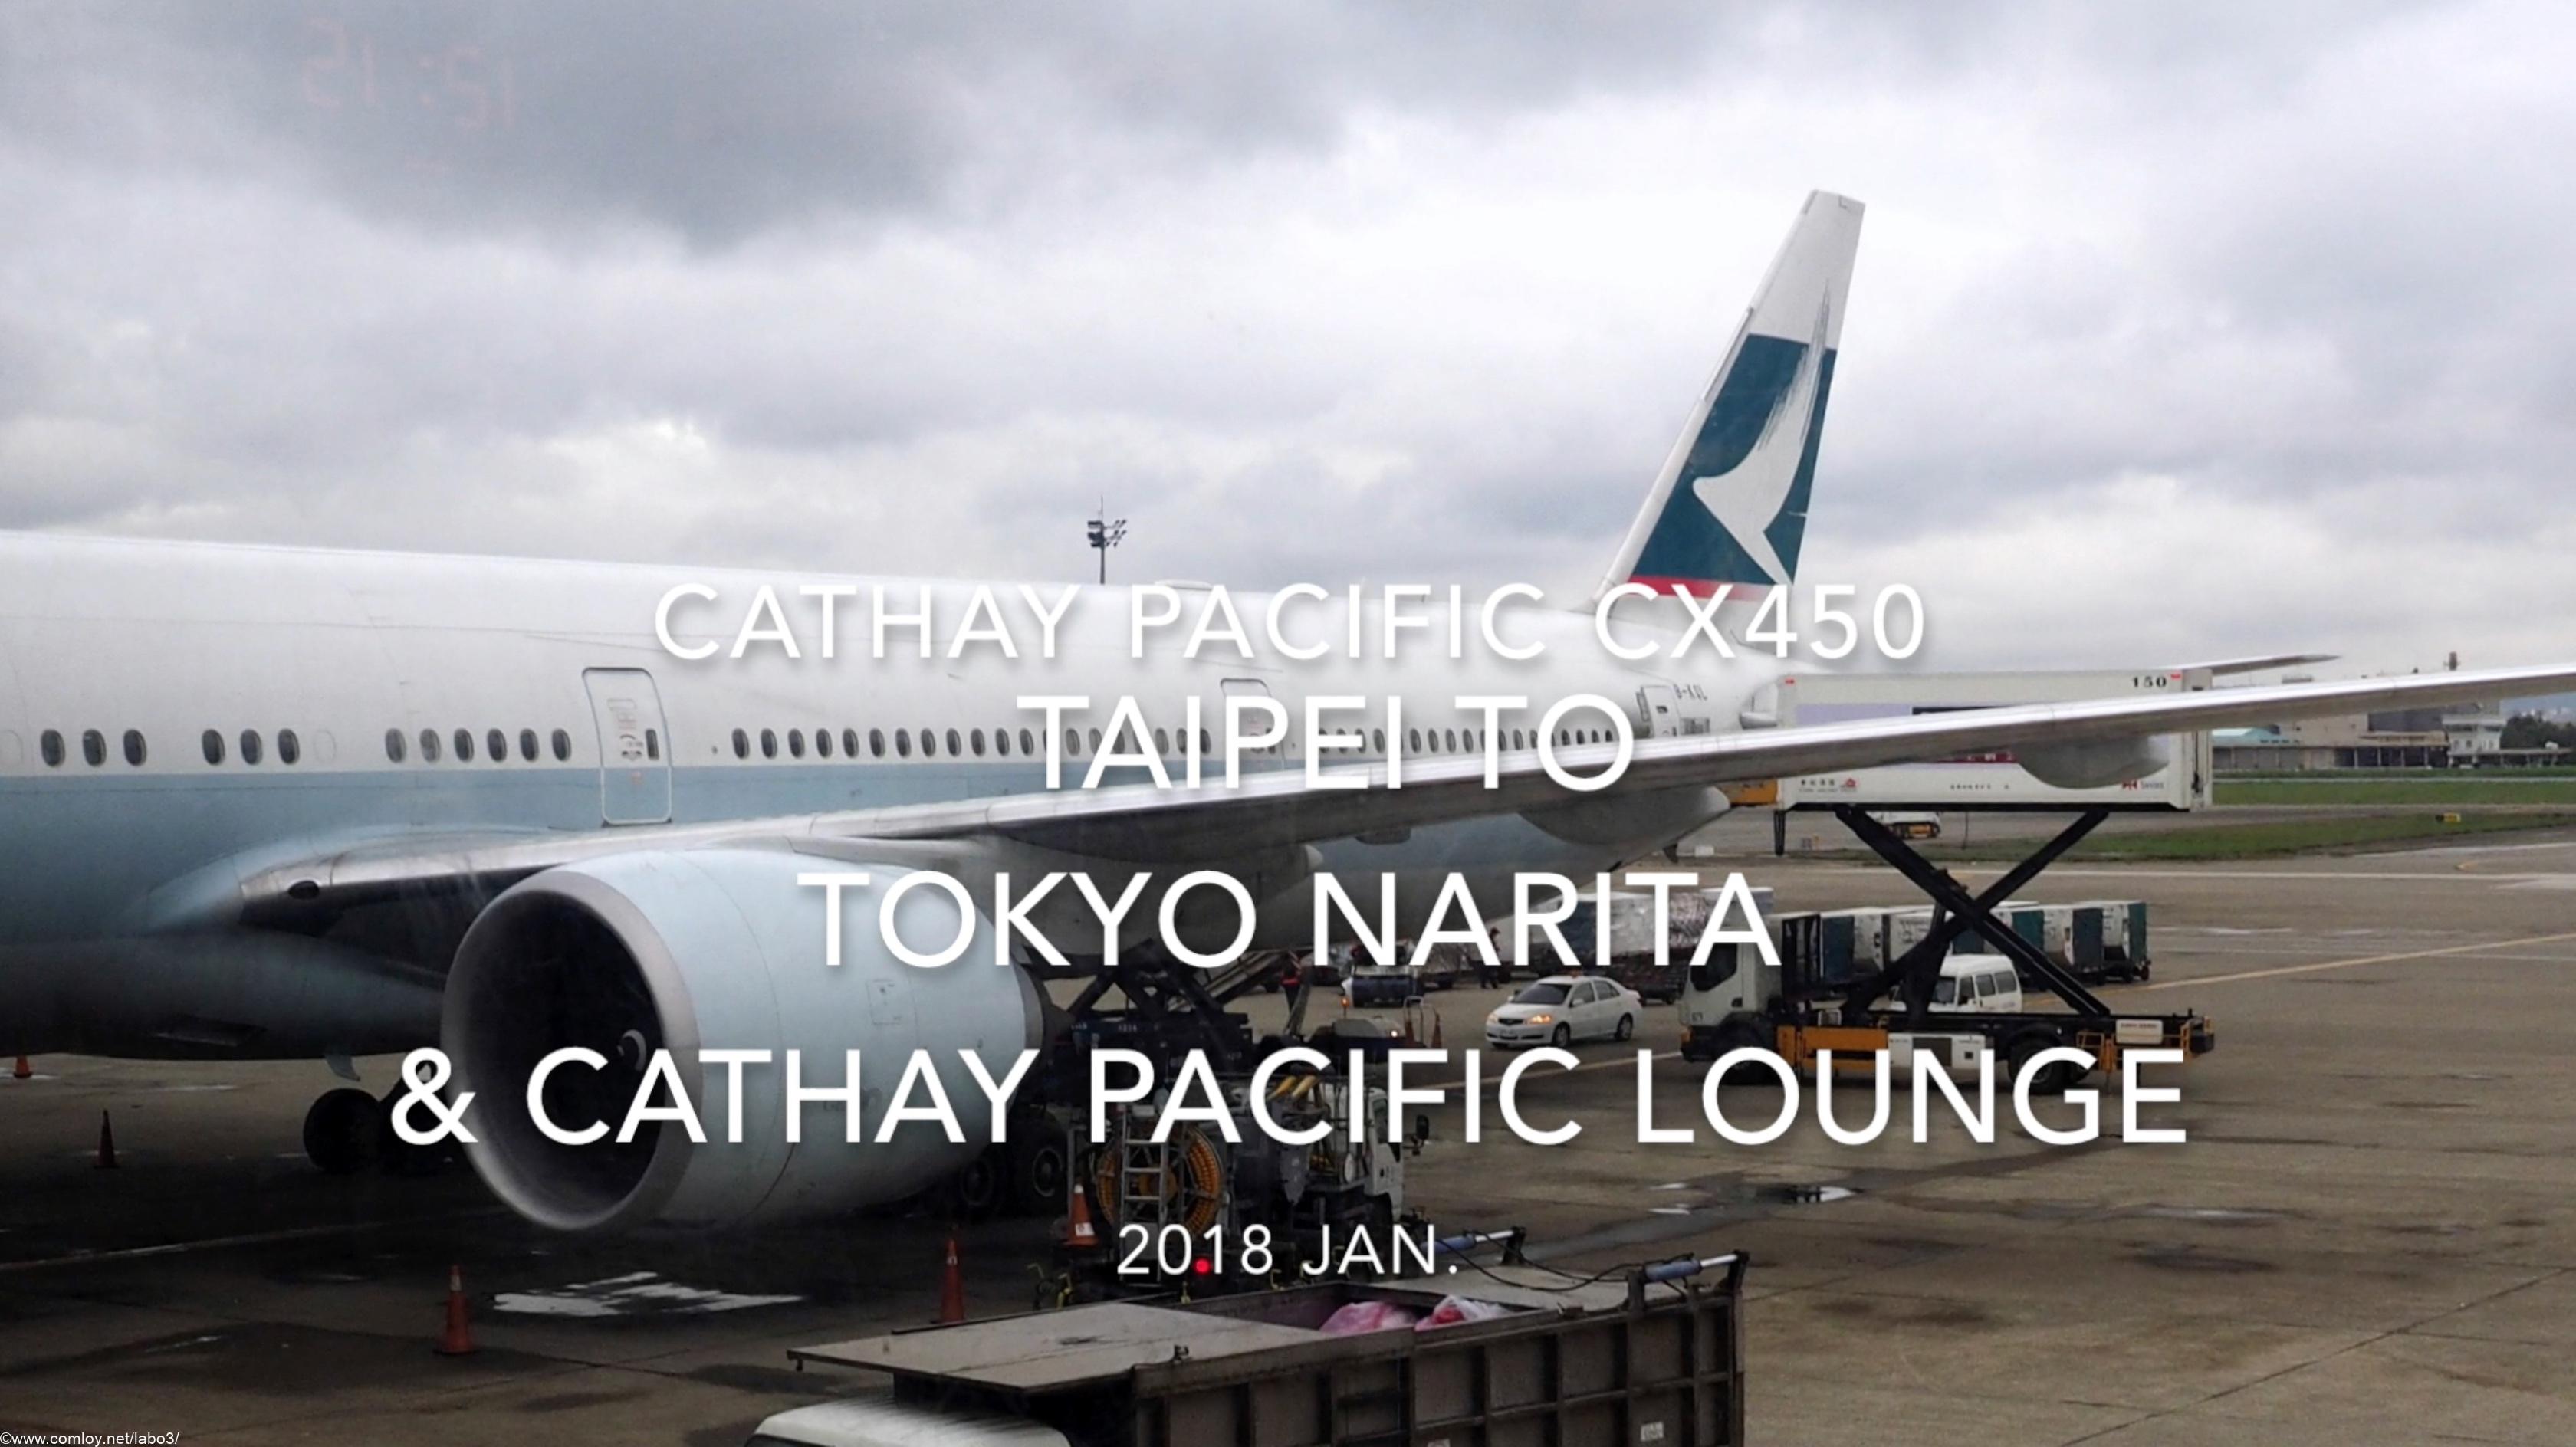 【Flight Report】 Cathay Pacific CX450 Taipei to Tokyo NARITA &Cathay Pacific LOUNGE 2018 Jan キャセイパシフィック 台北 - 成田 搭乗記&キャセイパシフィック ラウンジ